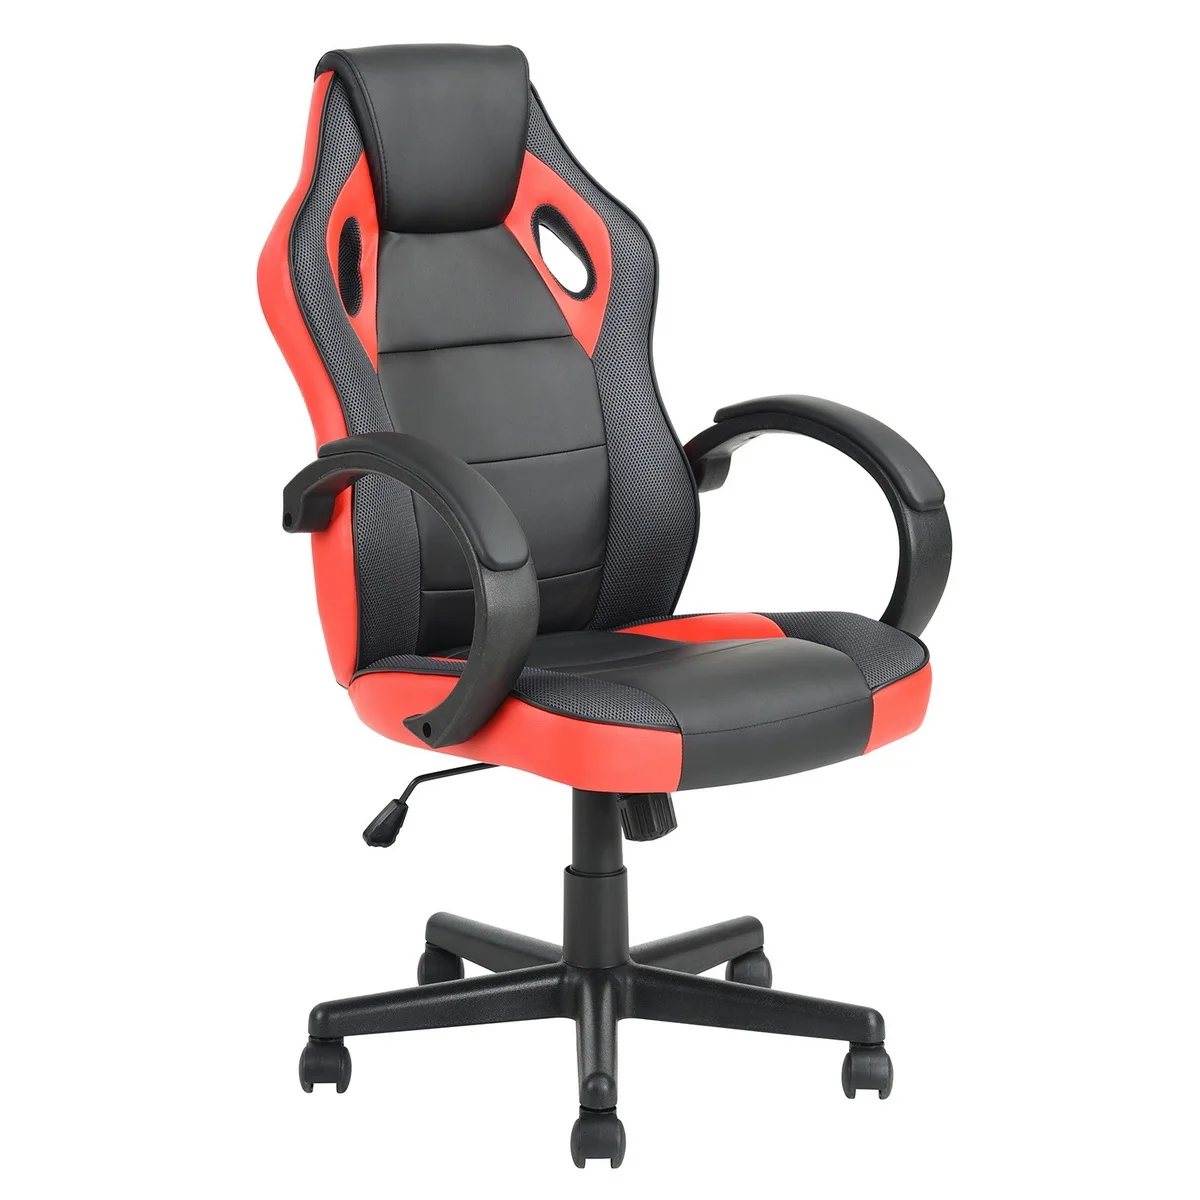 

YG Gaming Office Chair with Fabric Adjustable Swivel,Red